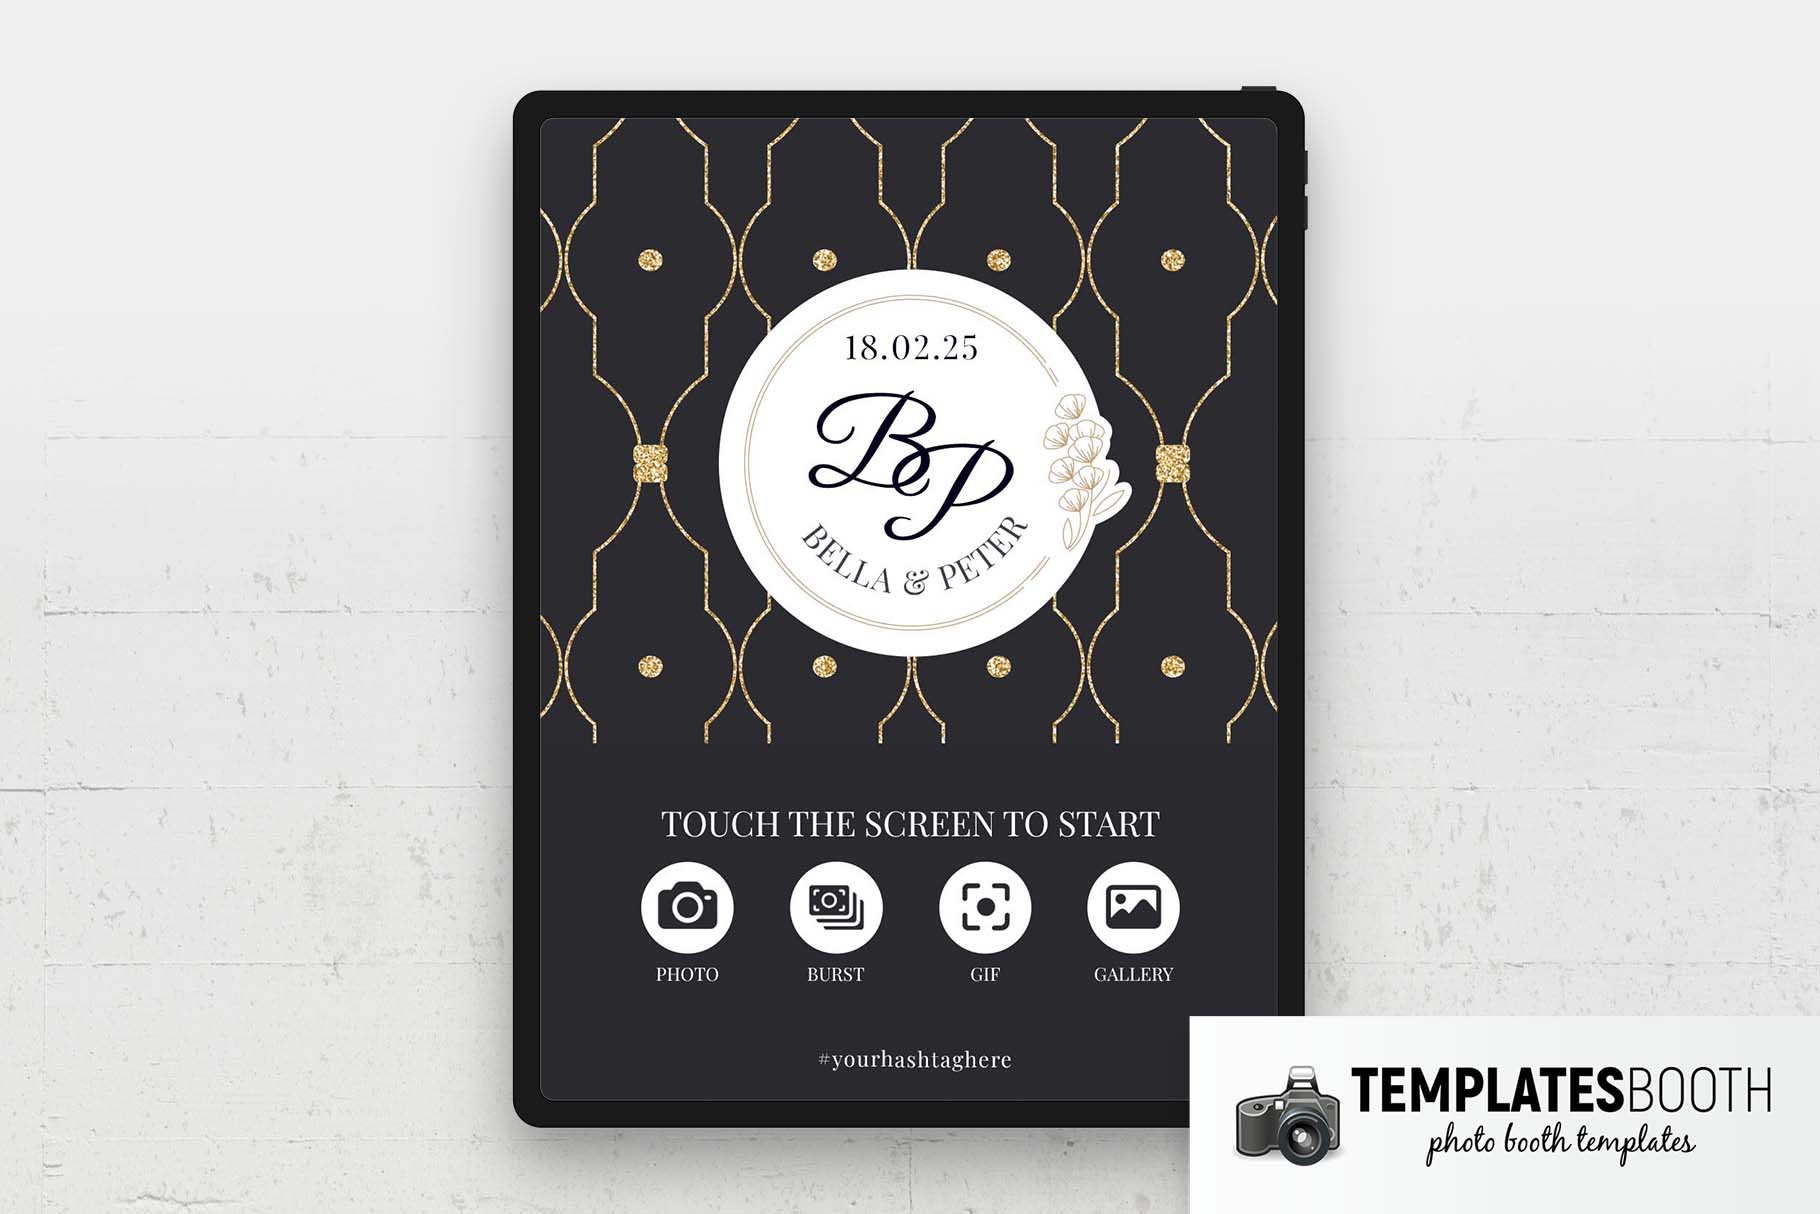 Deco Wedding Photo Booth Welcome Screen